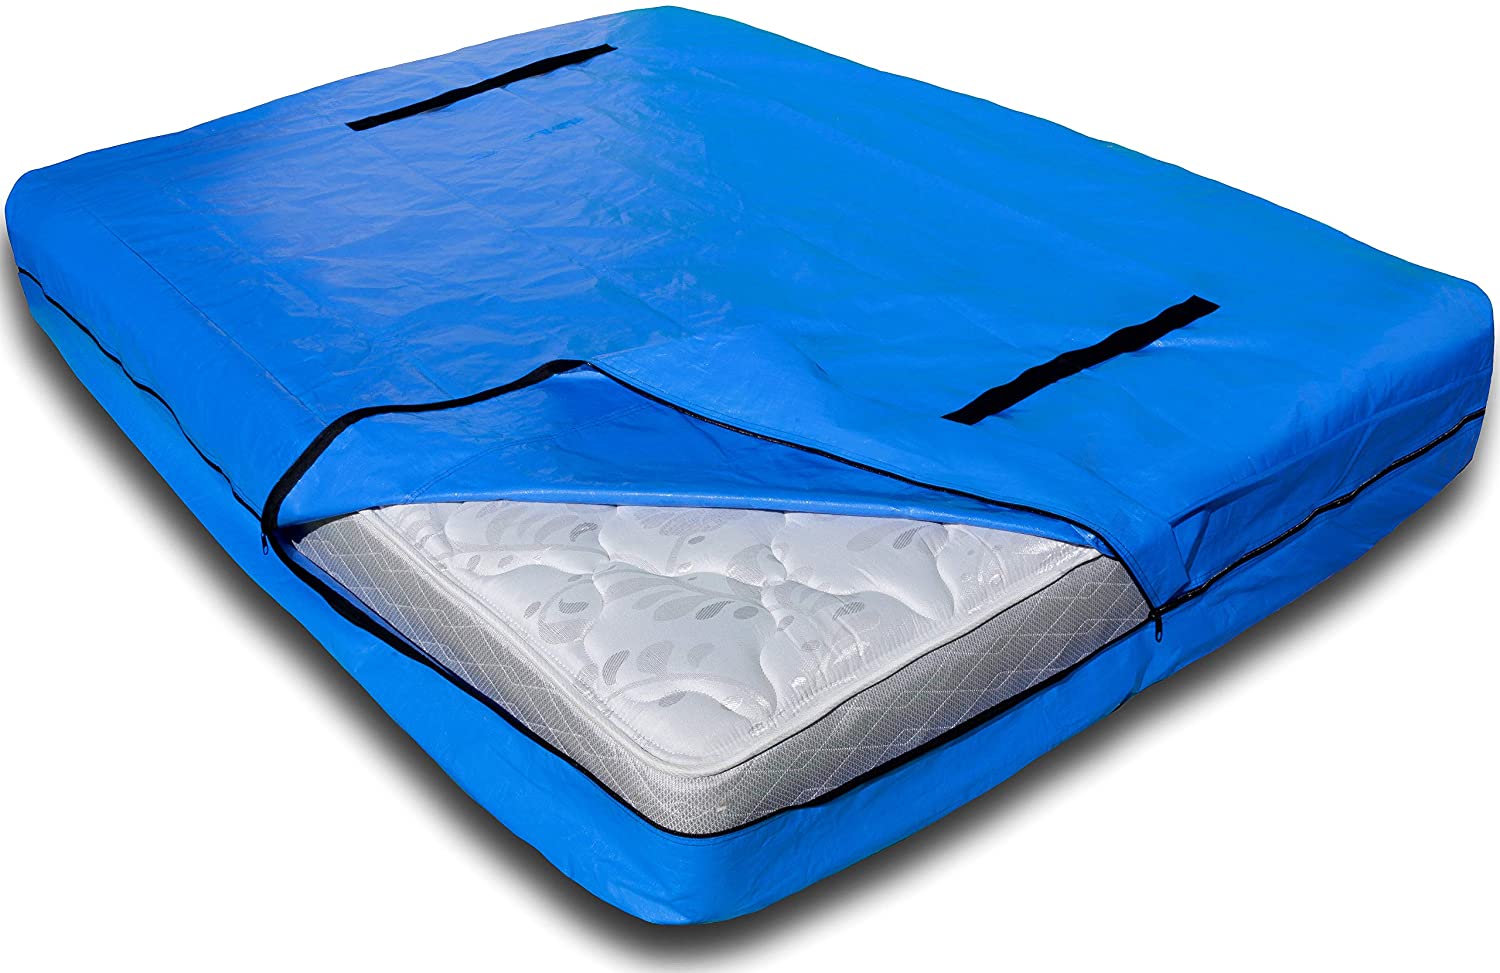 mattress protector bag for storage